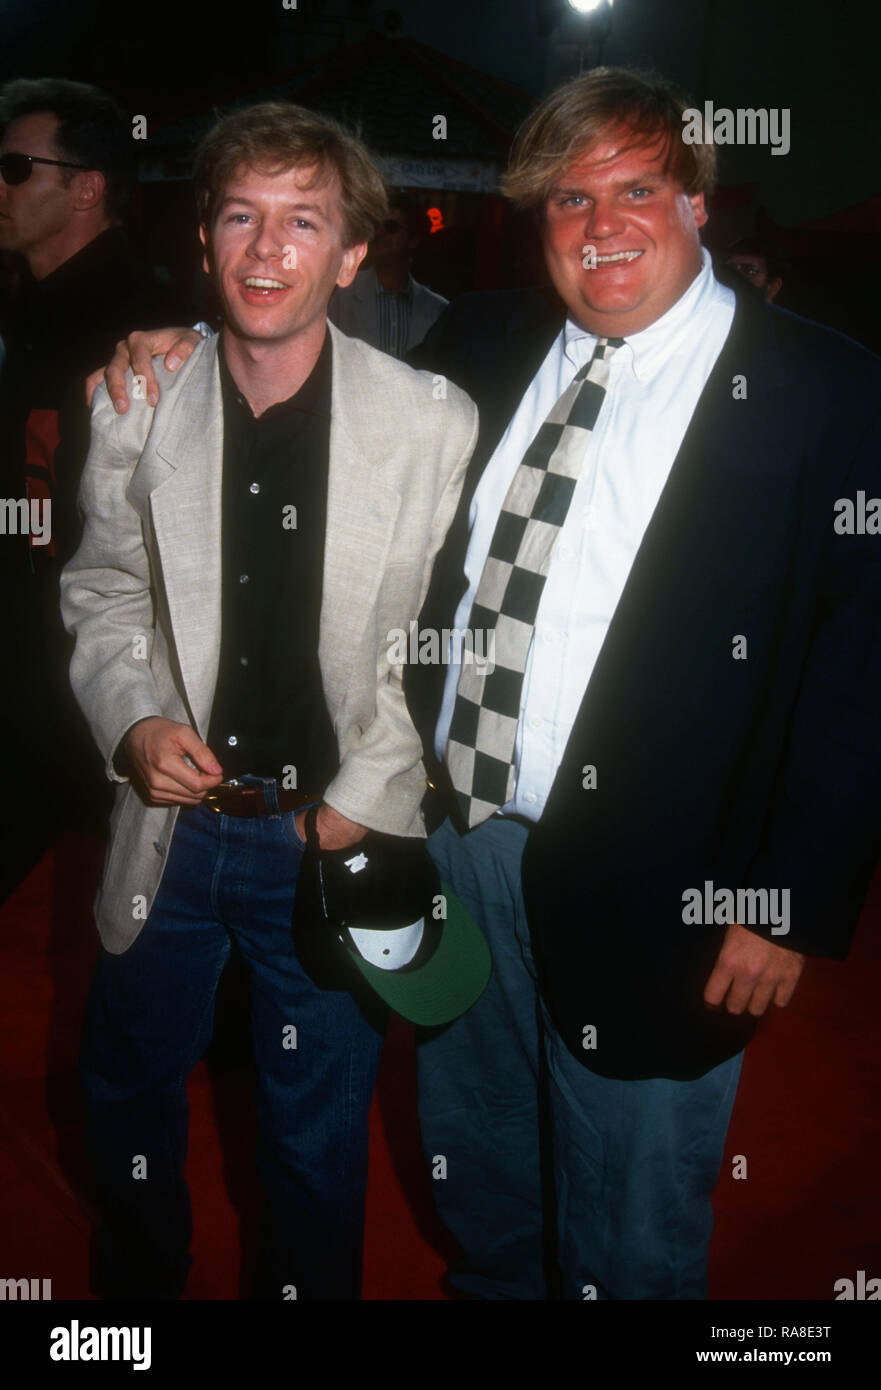 HOLLYWOOD, CA - JULY 19: Actor David Spade and actor Chris Farley attend Paramount Pictures' 'Coneheads' Premiere on July 19, 1993 at Mann Chinese Theatre in Hollywood, California. Photo by Barry King/Alamy Stock Photo Stock Photo